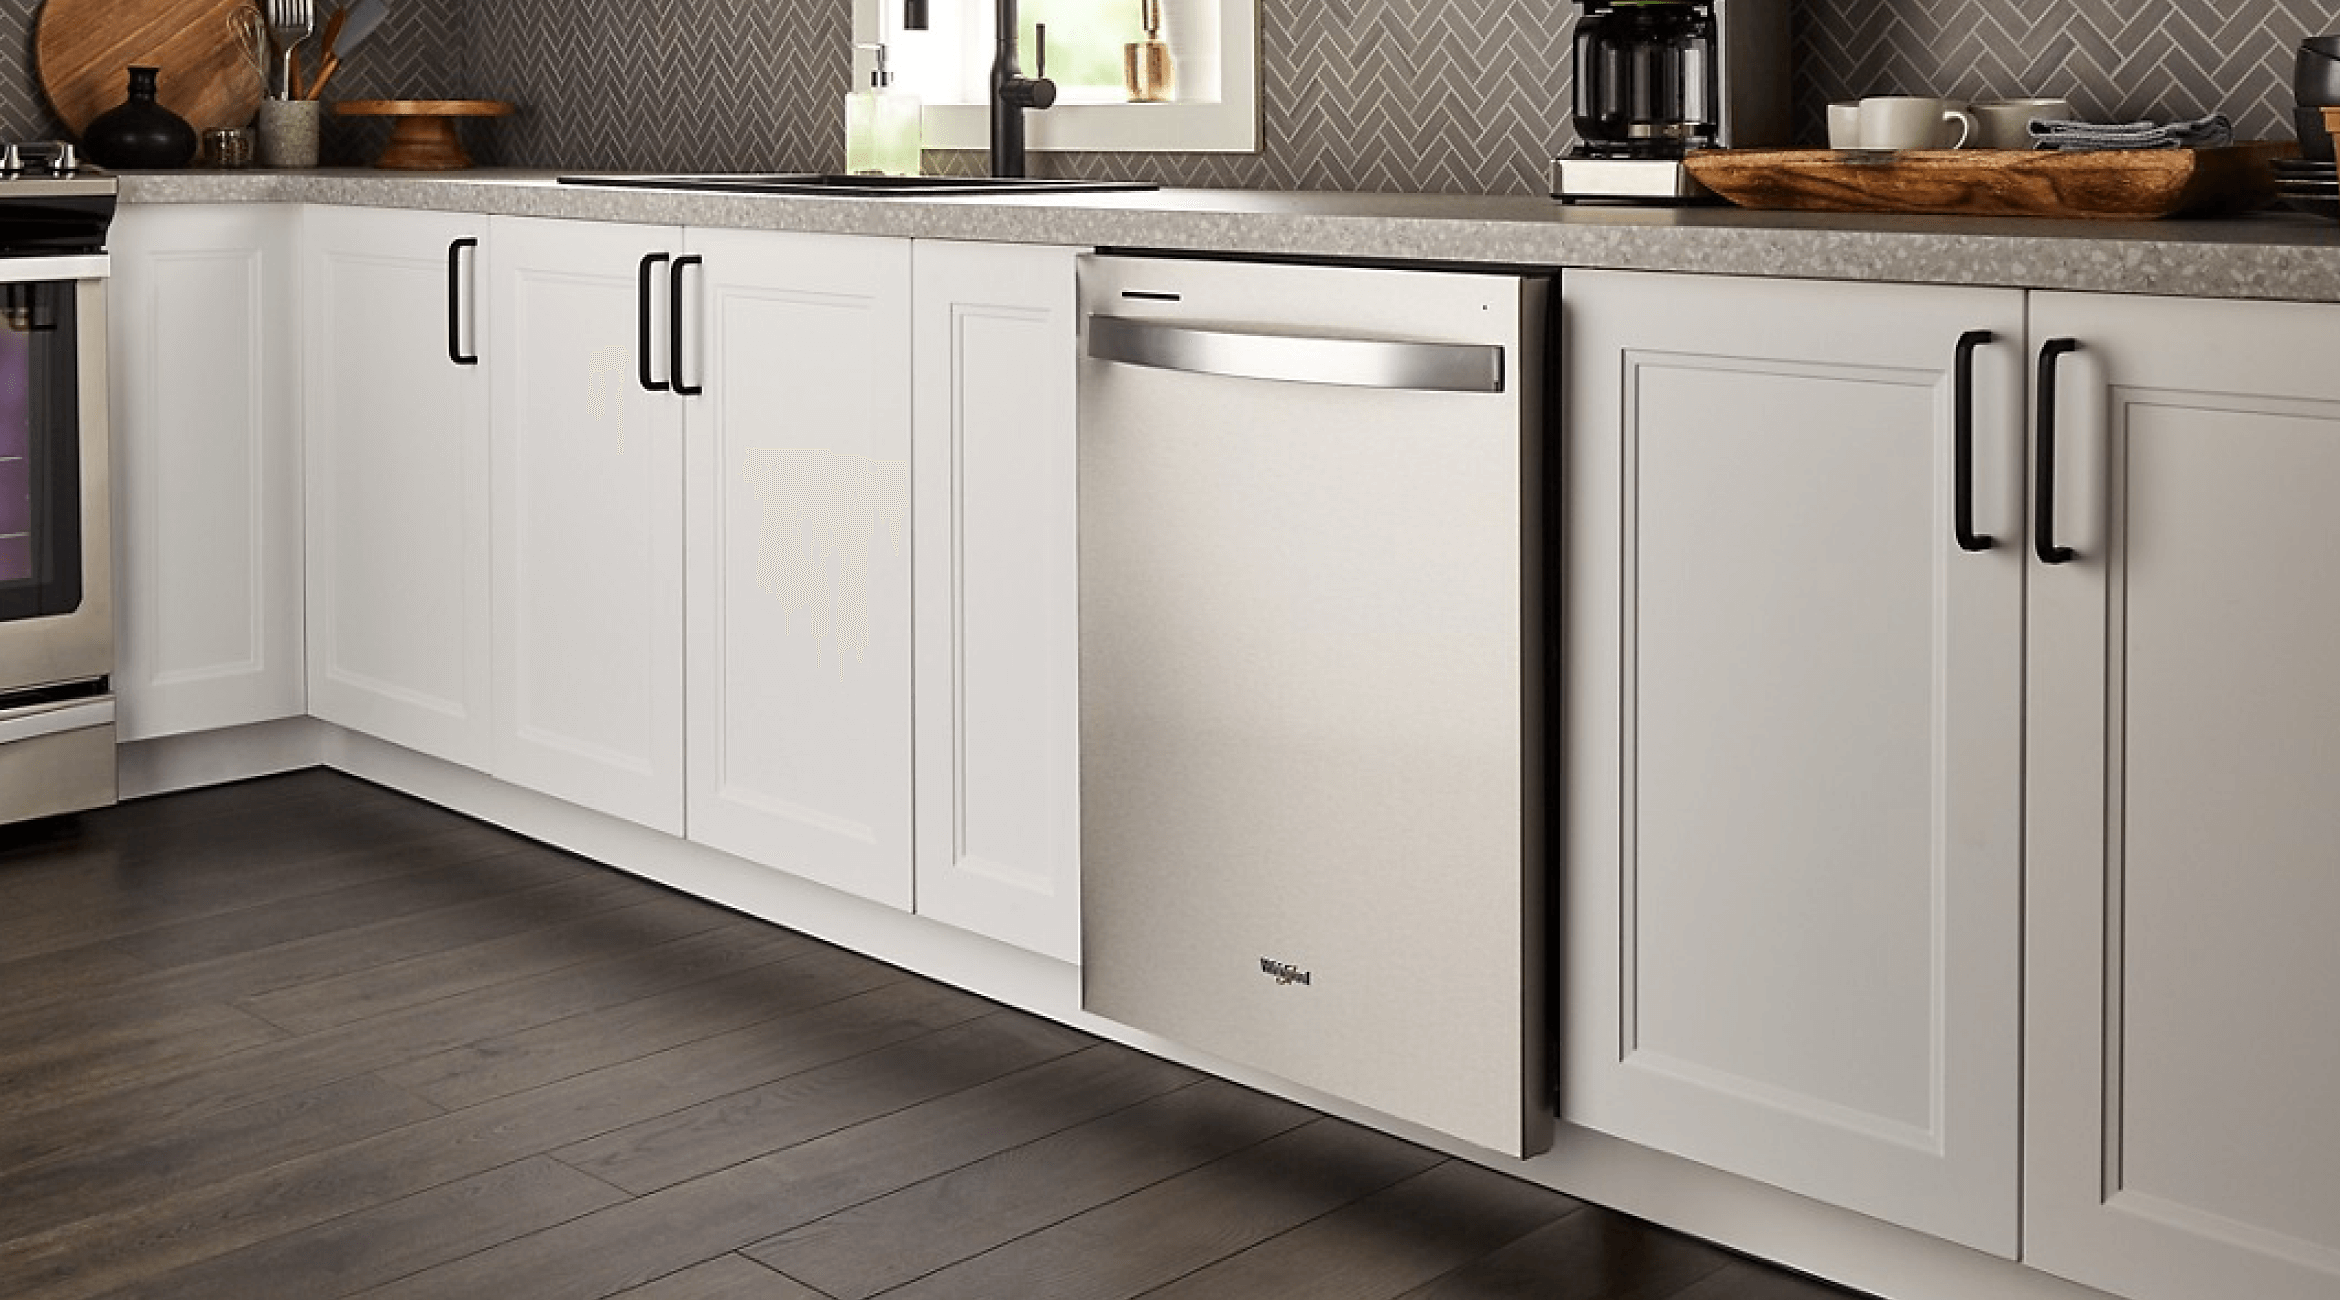 A Whirlpool® Standard Dishwasher in a kitchen with white cabinets